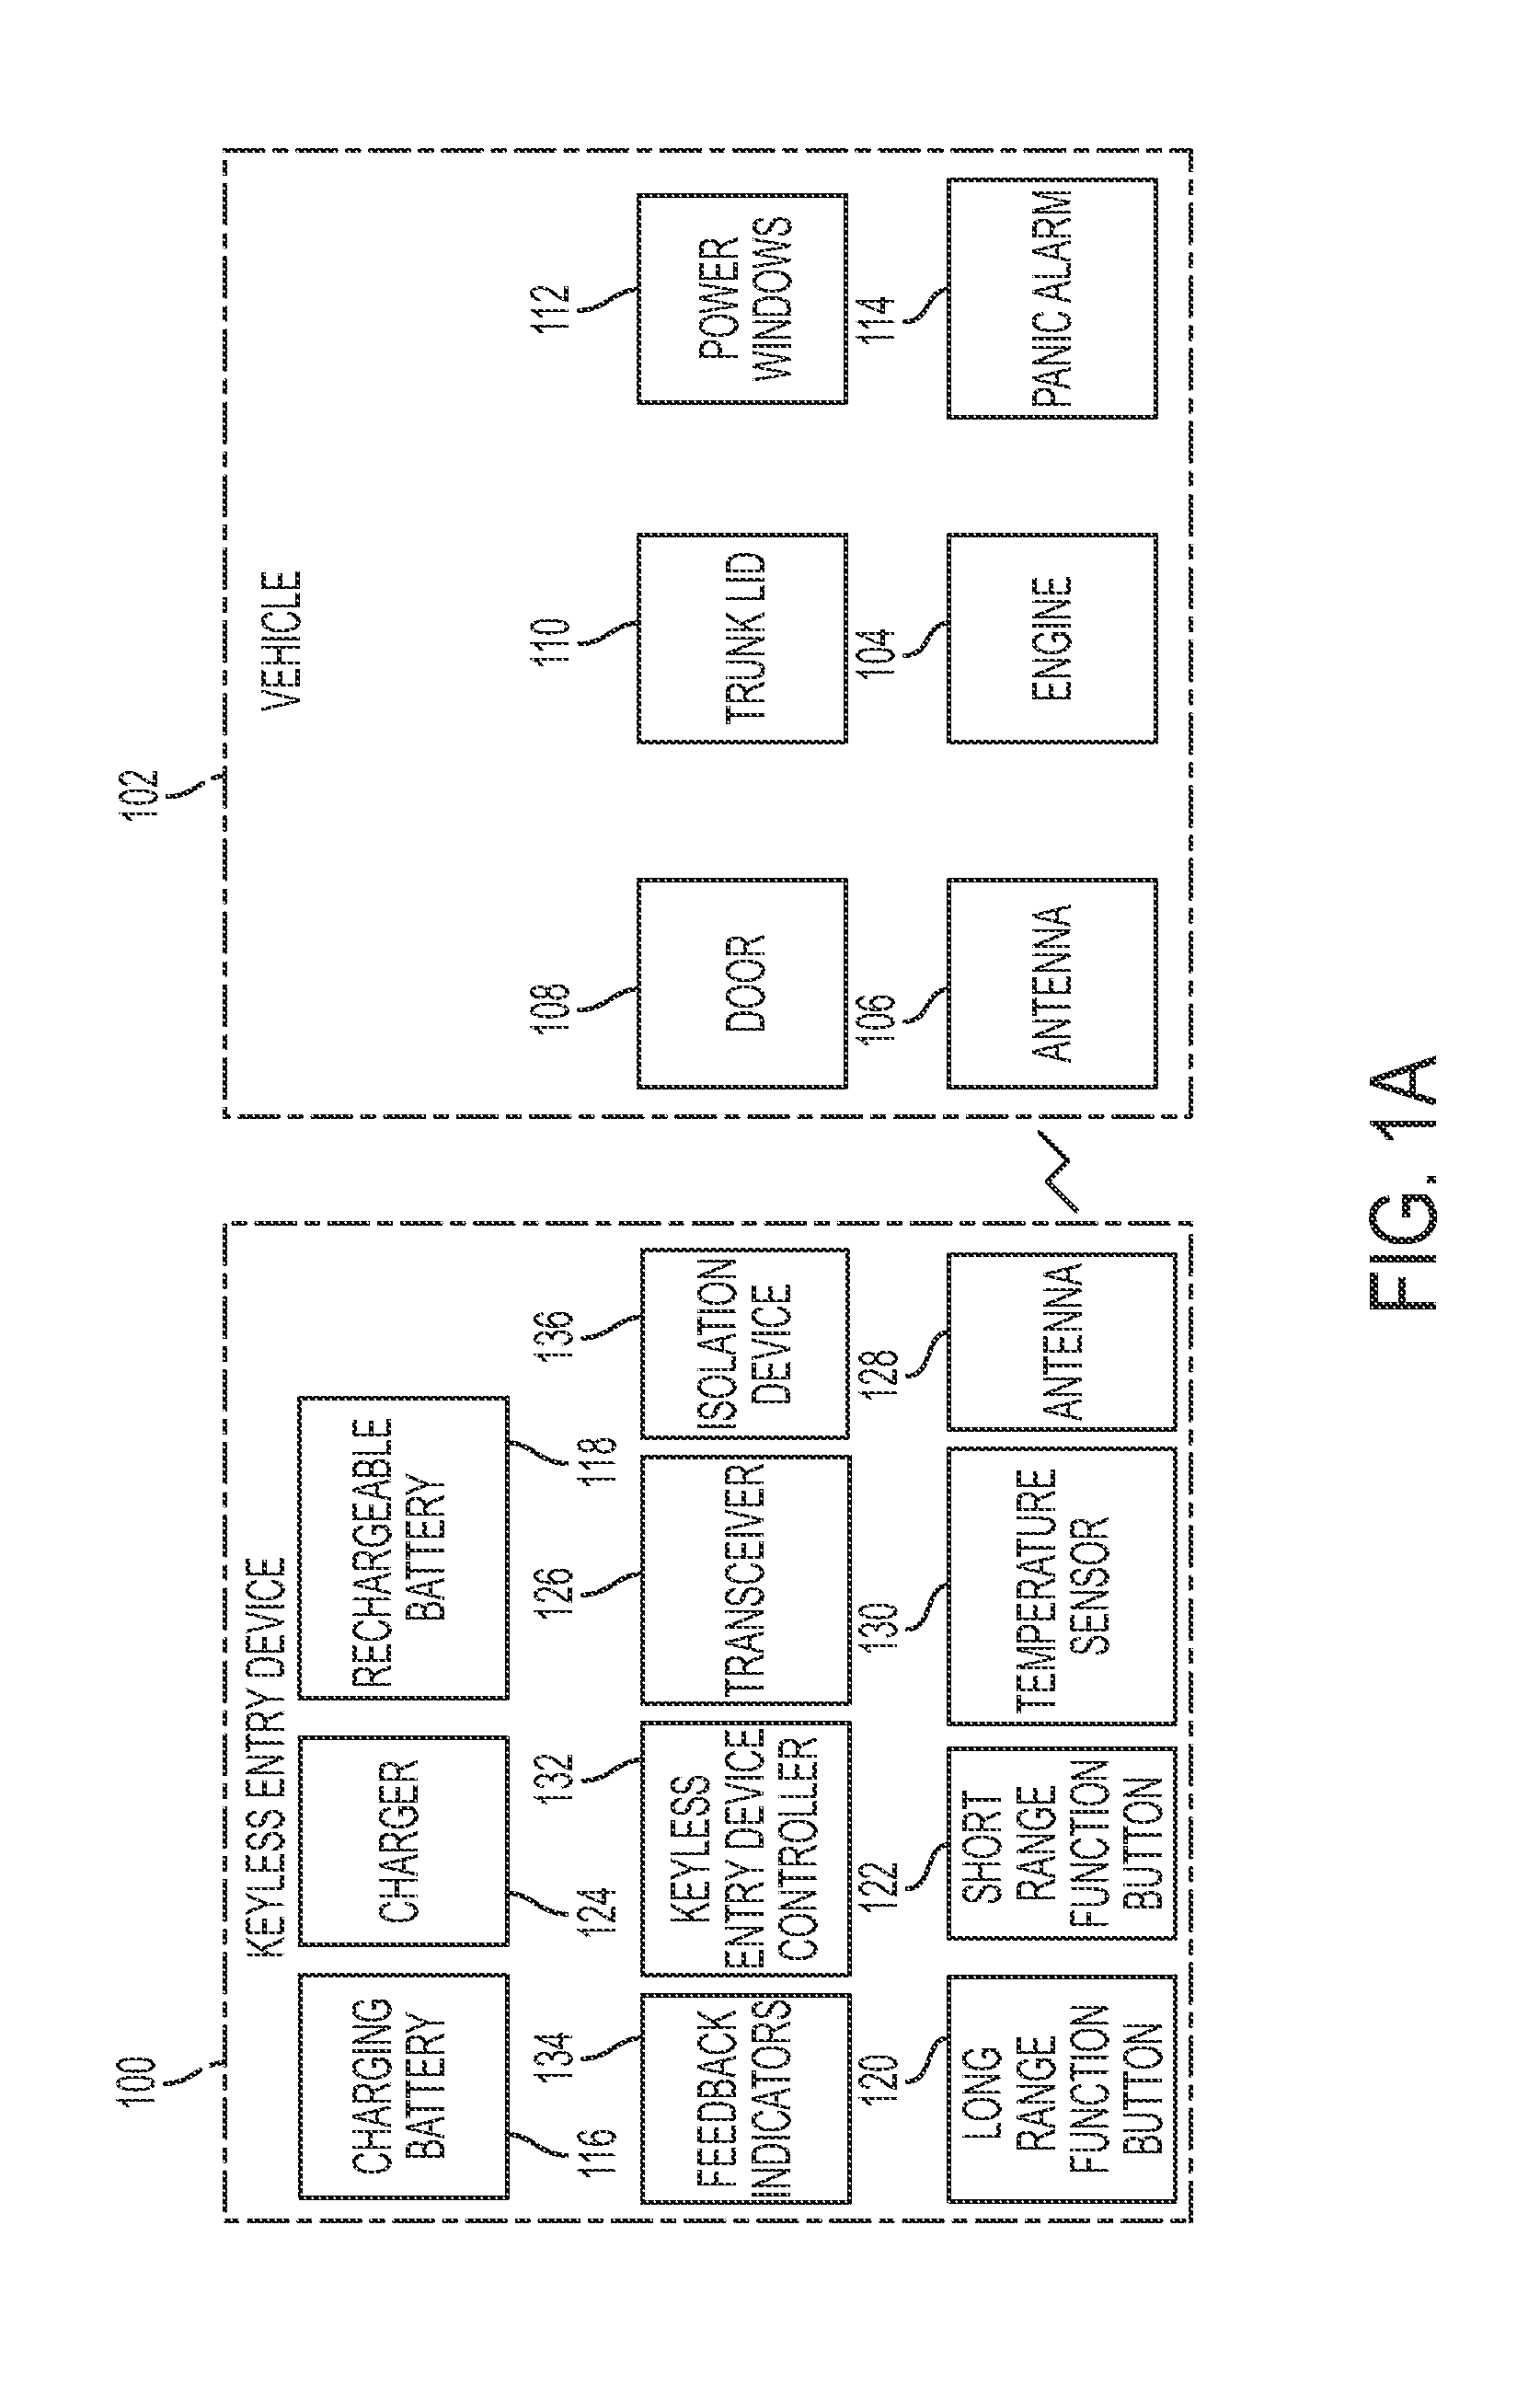 Keyless entry device and method for powering the keyless entry device